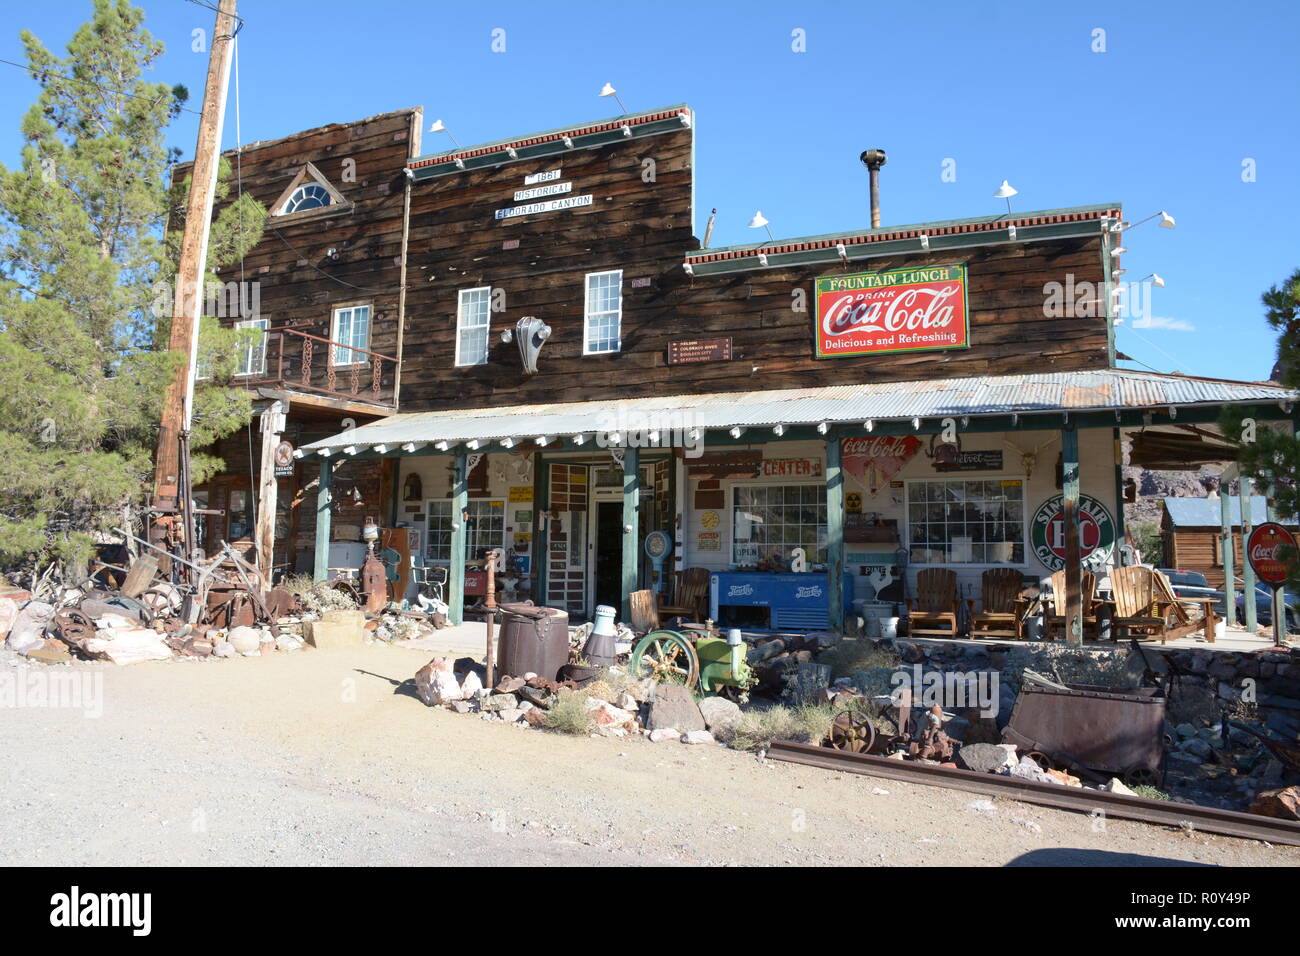 Nelson Nevada tourist attraction ghost town mining Stock Photo